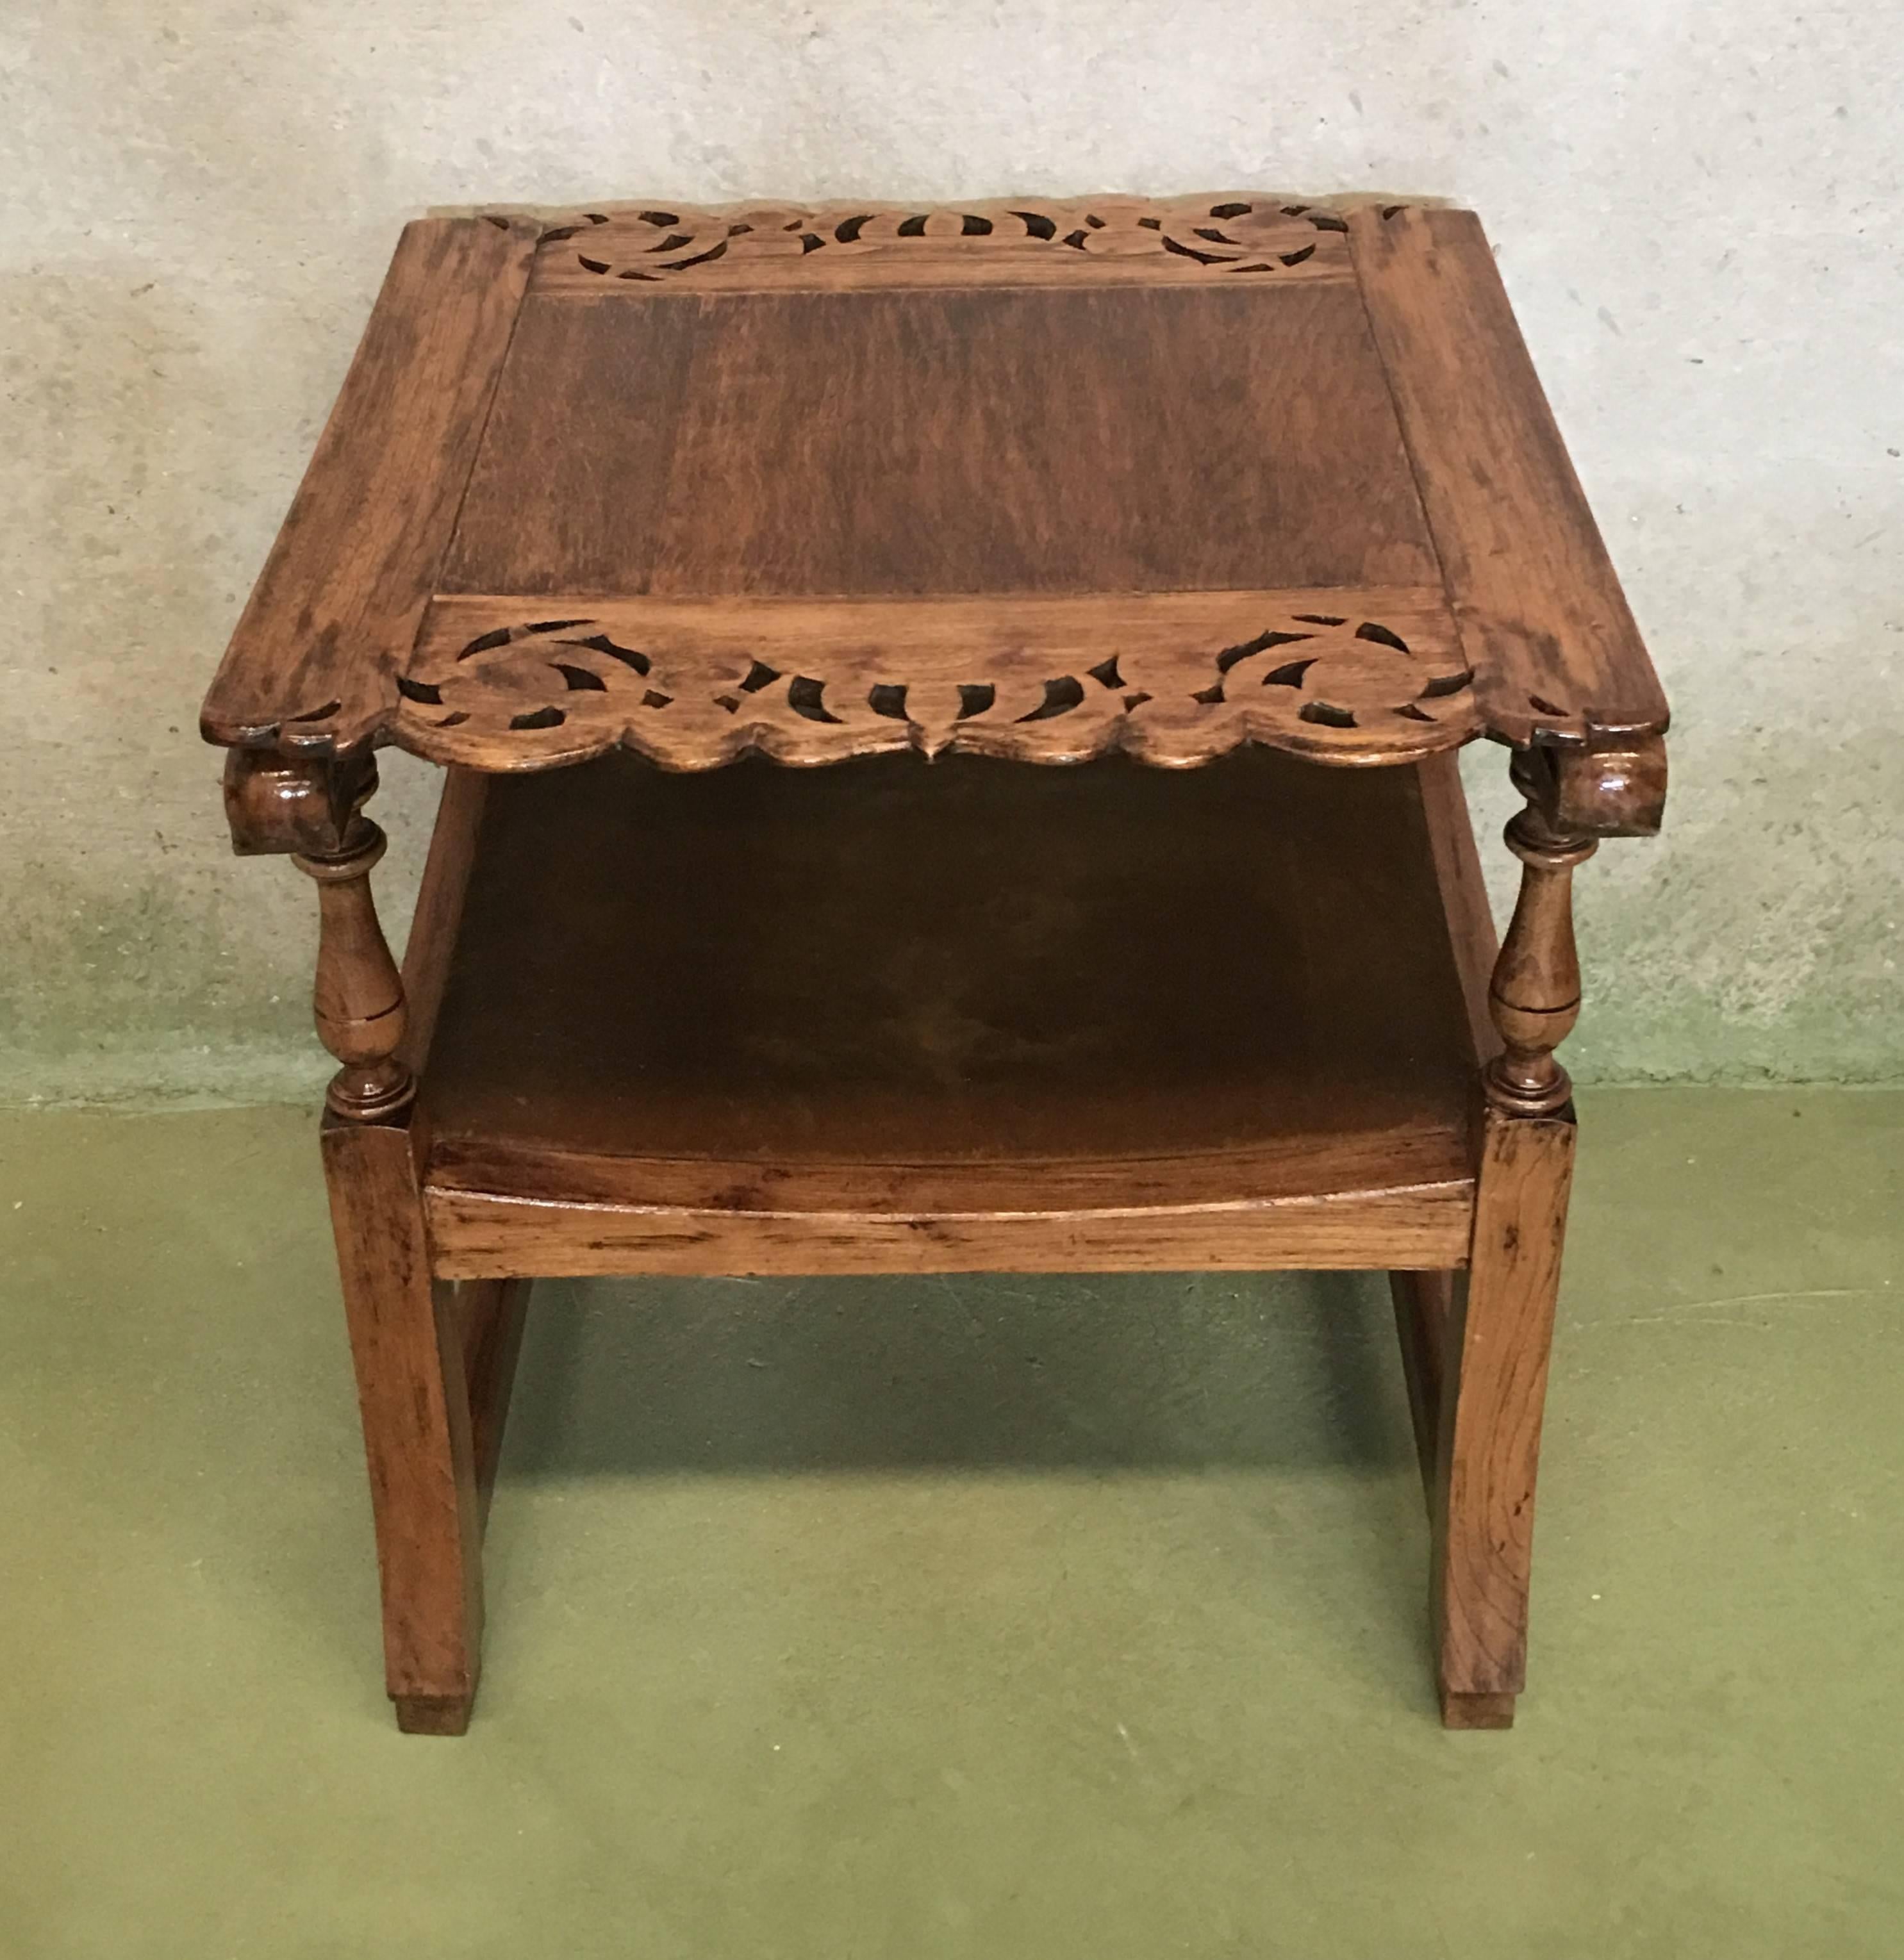 19th Century Convertible Monk's Chair or End Table. Walnut foldable Armchair 5